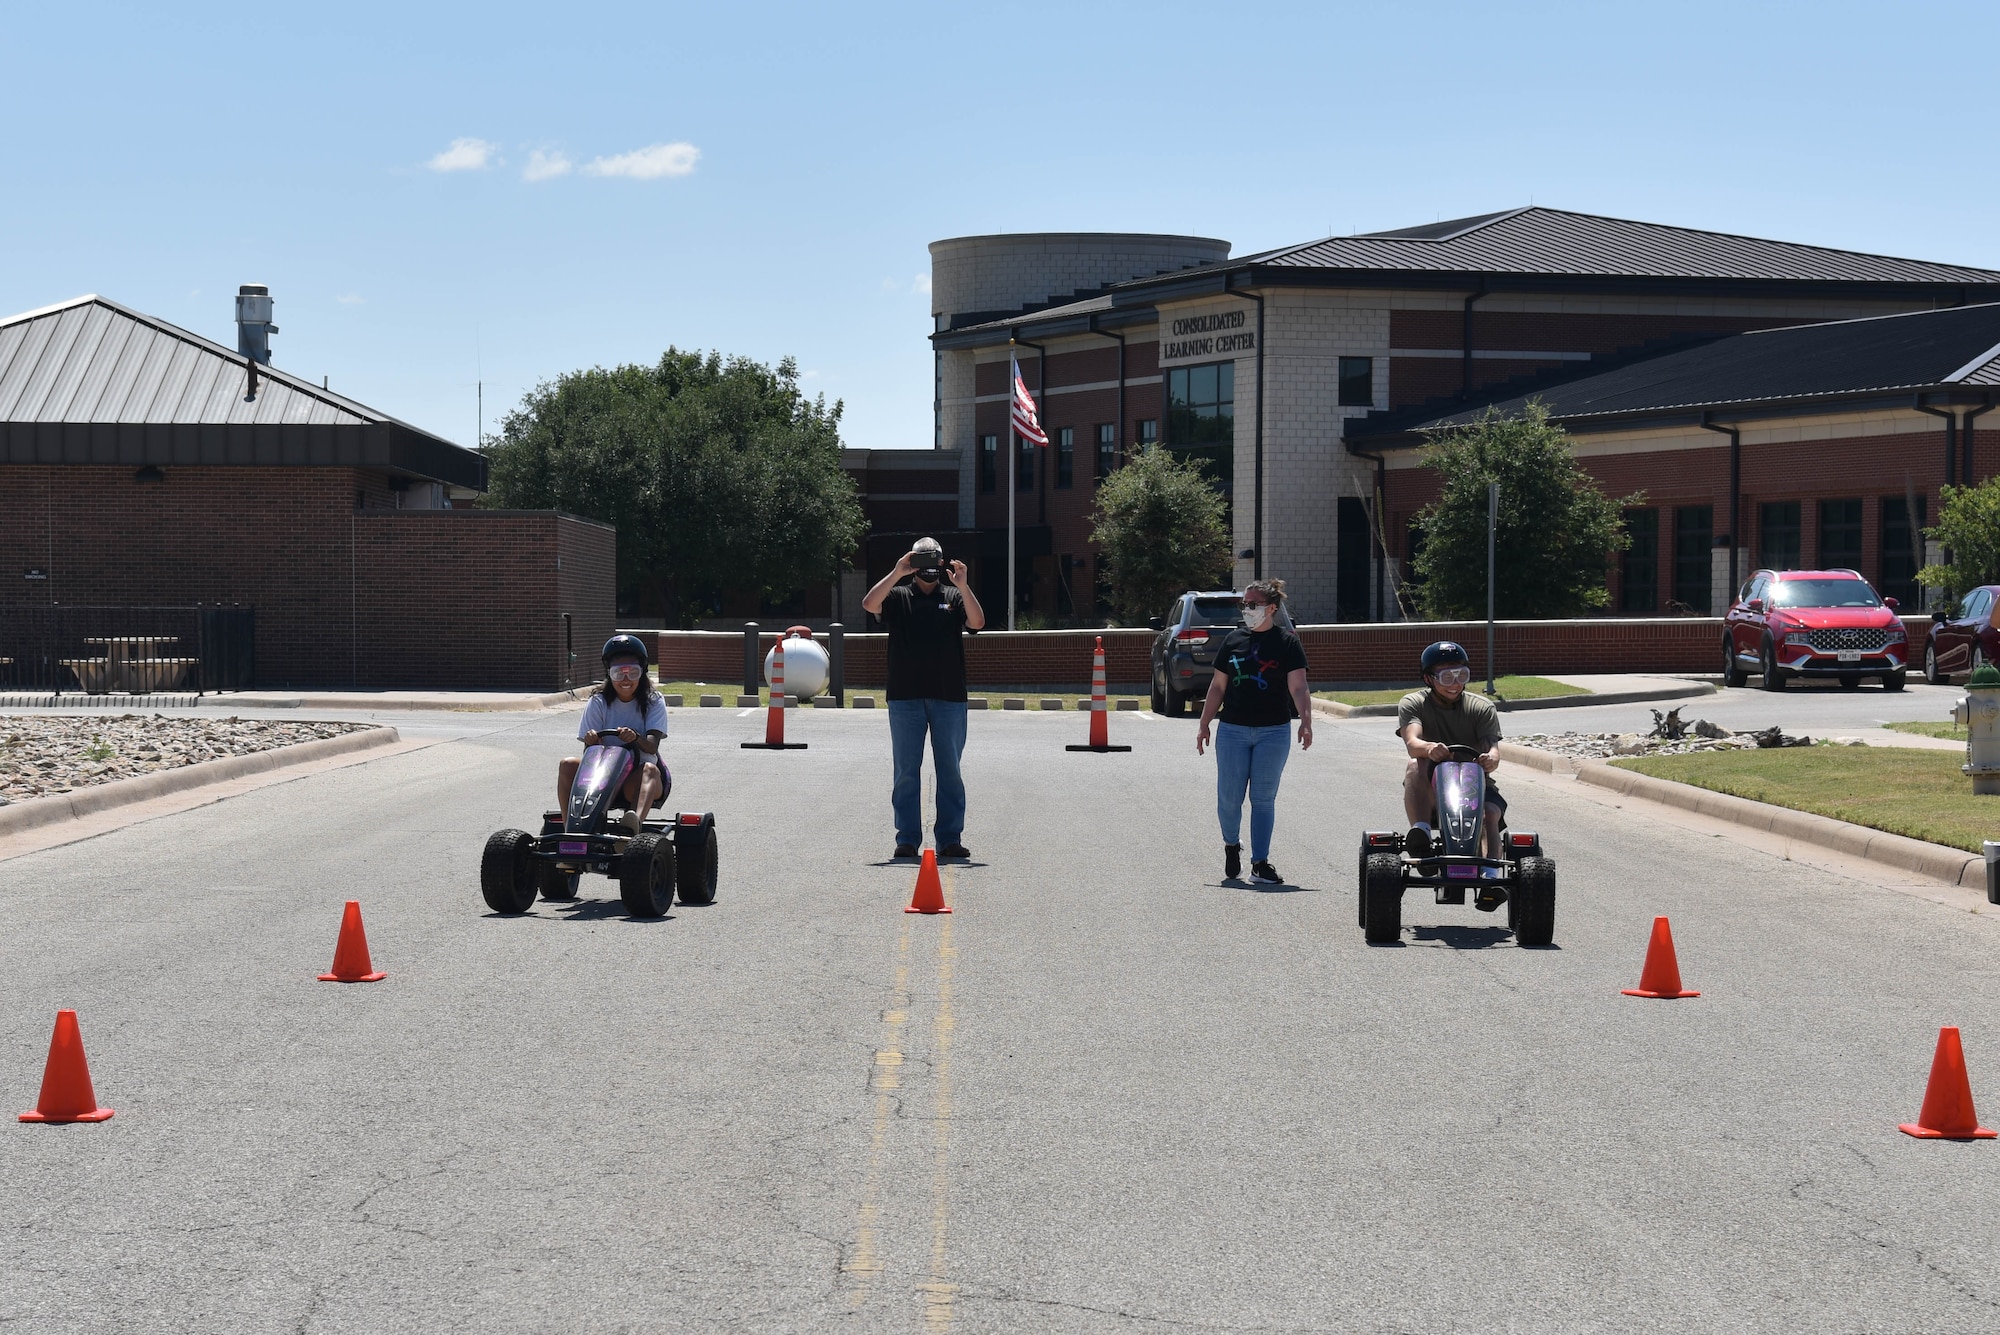 U.S. Air Force 17th Security Forces Squadron Airmen race each other to finish a challenge during the Raider Race scavenger hunt during Wing Sports Day on Goodfellow Air Force Base, Sept. 17, 2021. Members wore simulation goggles while driving go-carts to test their hand and eye coordination for this challenge. (U.S. Air Force photo by Senior Airman Jermaine Ayers)